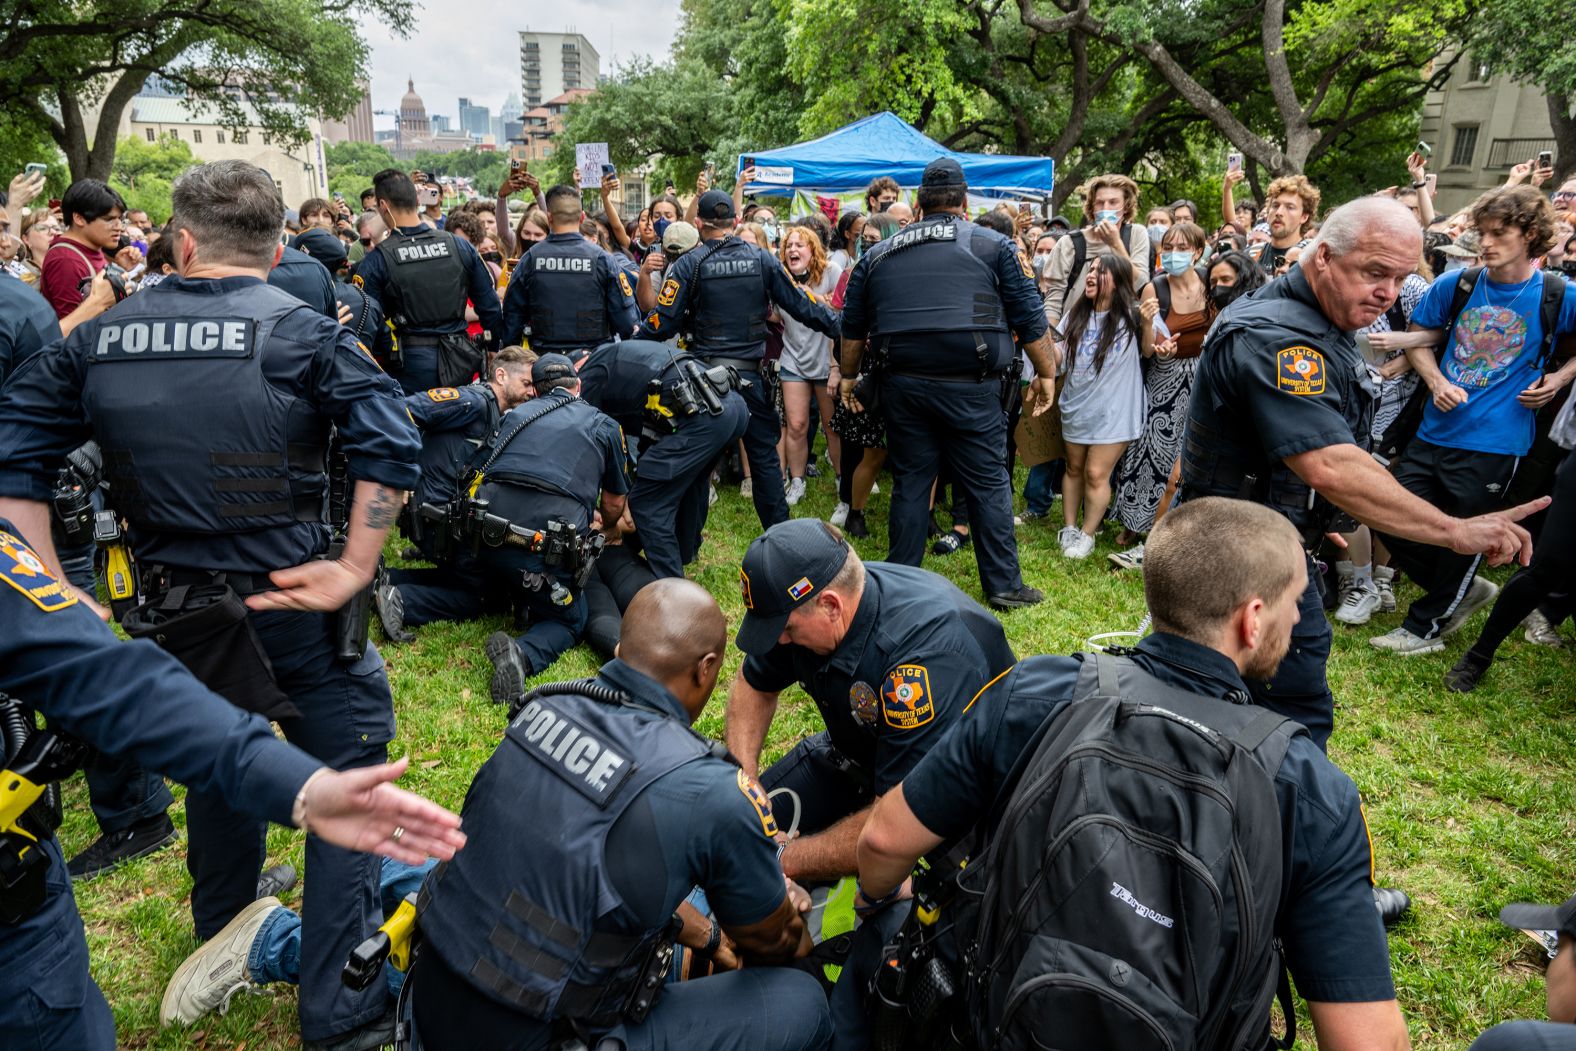 Students are arrested during the protest in Austin on April 24. <a href="https://www.cnn.com/business/live-news/columbia-usc-university-protests-04-25-24/h_fe6a015b9b48e0c63141f63de83c9726" target="_blank">There were dozens of arrests</a>. University police had warned students in an email that they faced more arrests if they didn't disperse from the site.